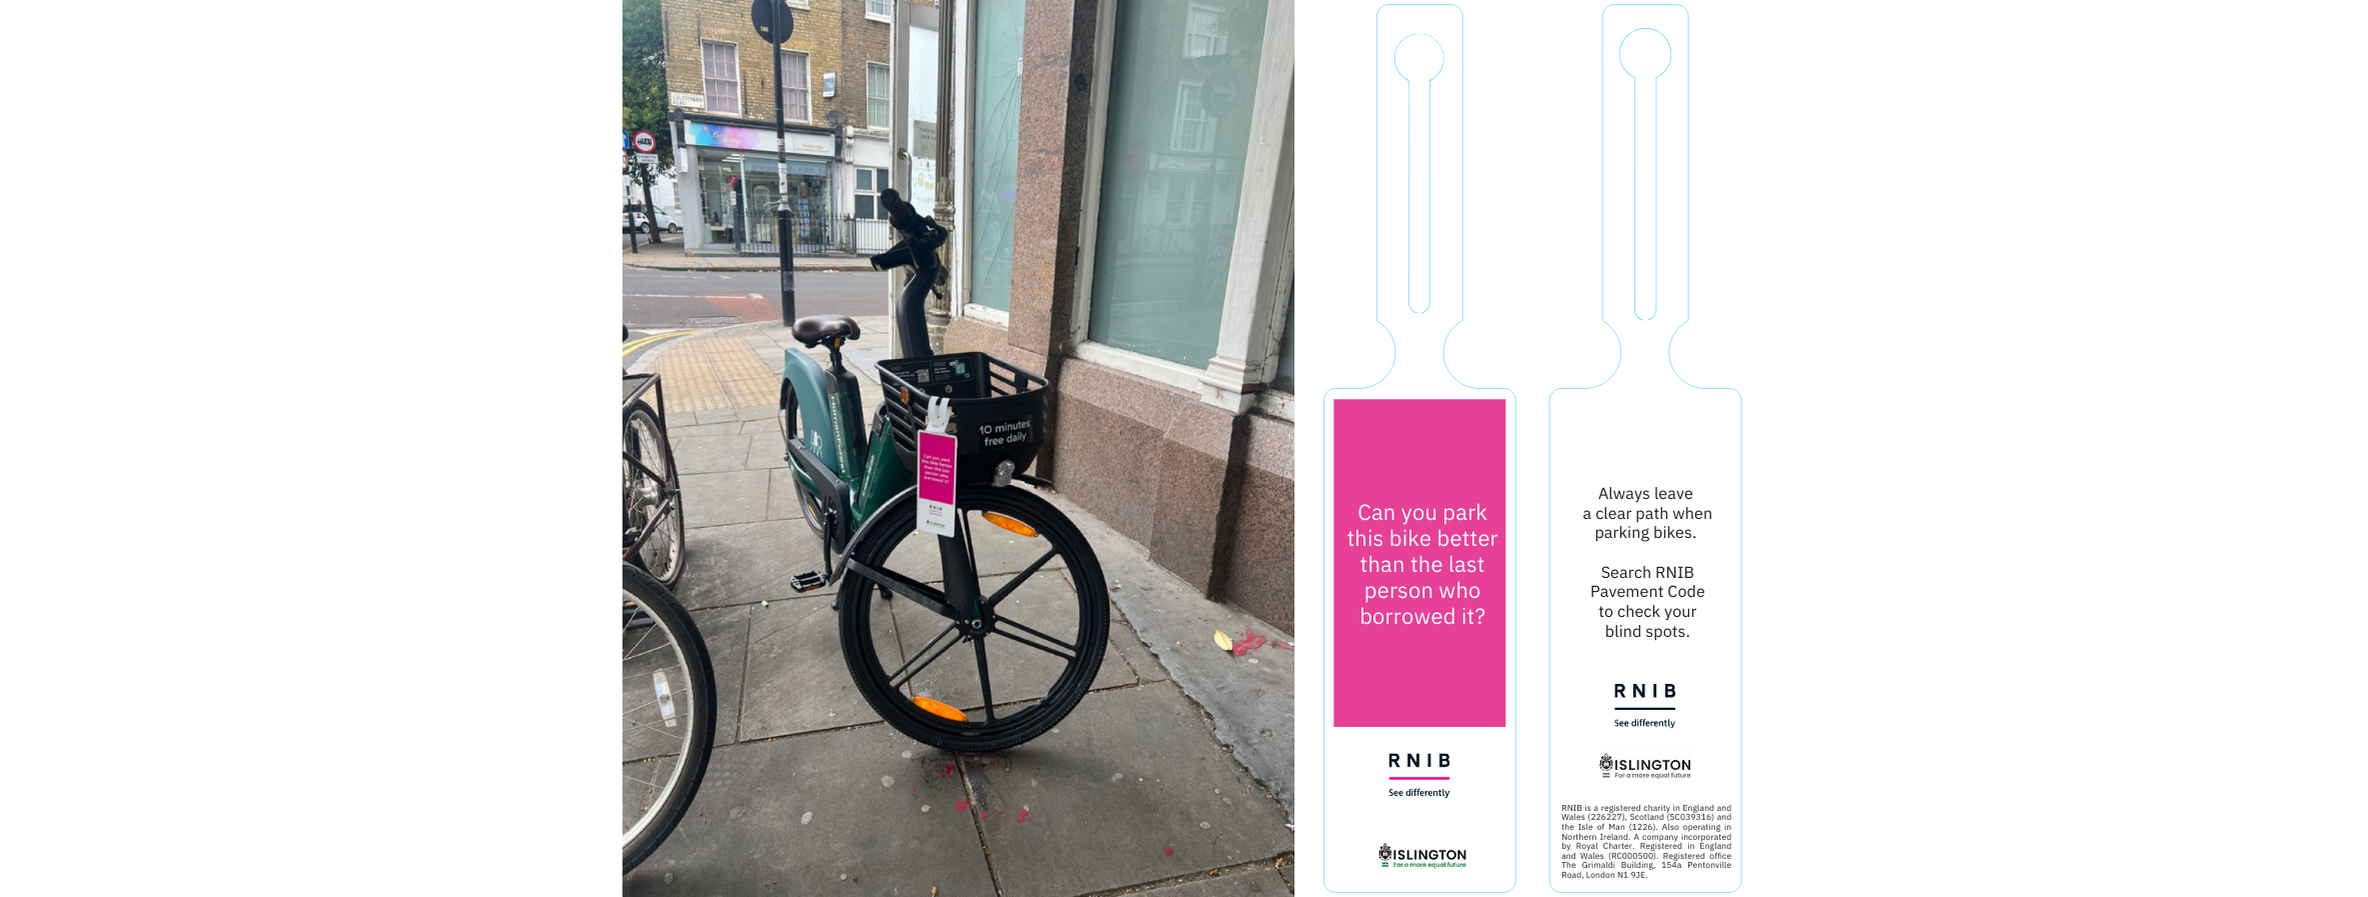 On the left there is an image of a Human Forest bike obstructing the pavement with a bike tag tagged to it. On the right, there is a PDF version of the bike tag which reads "Can you park this bike better than the last person who borrowed it?" and on the back it says "Always leave a clear path when parking bikes. Search RNIB Pavement Code to check your blind spots." RNIB and Islington Council's logos are on both sides of the tag. 